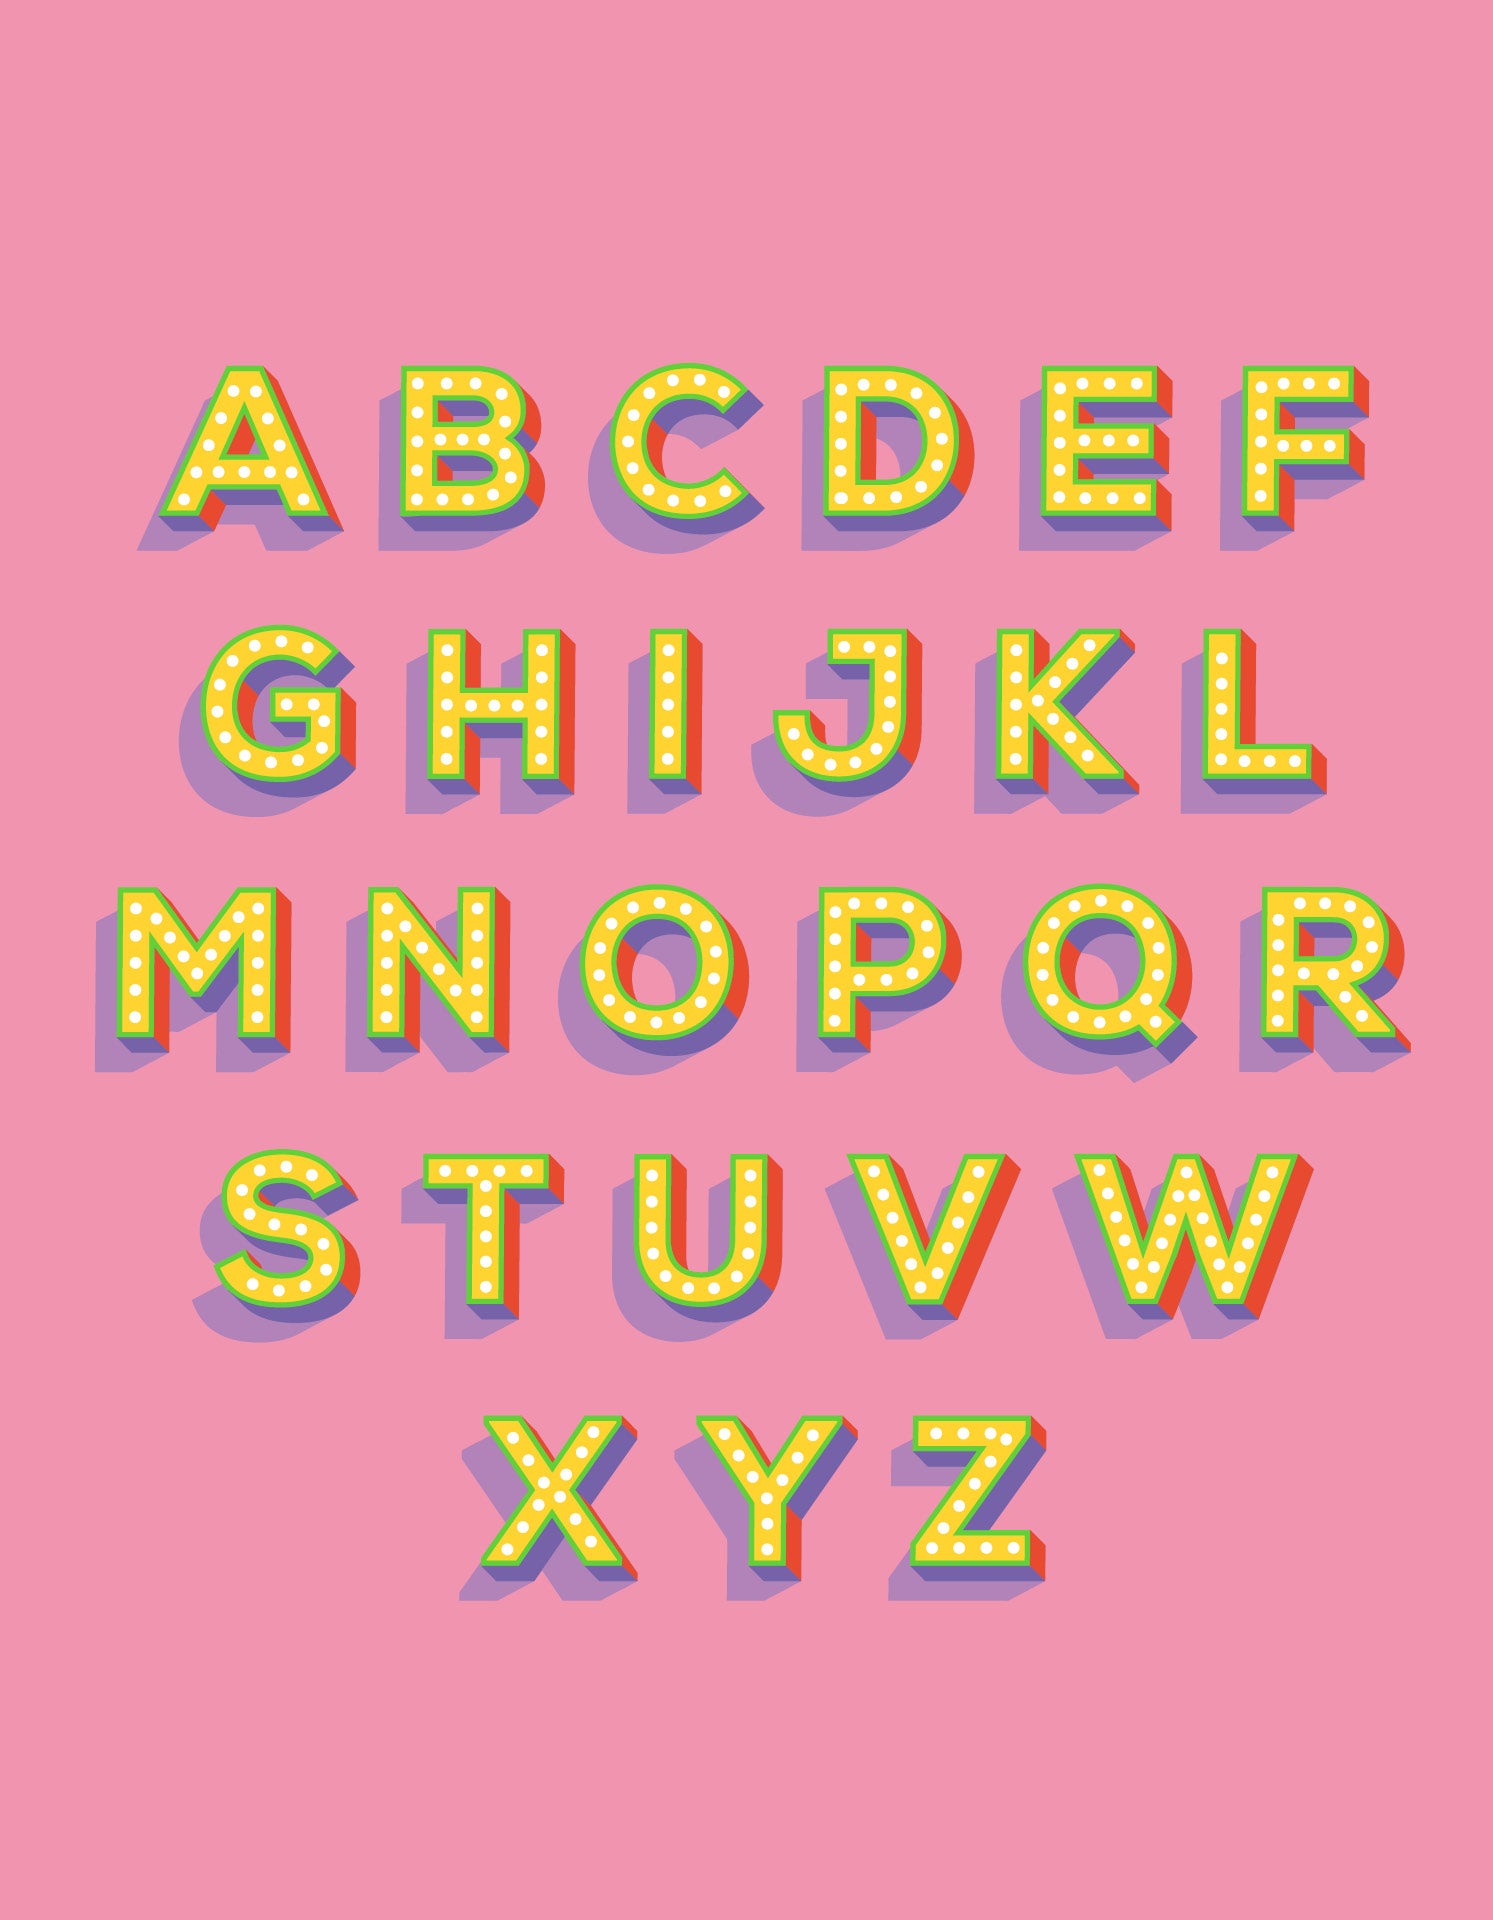 Alphabet print - lights on font in yellow against a pink background - full alphabet